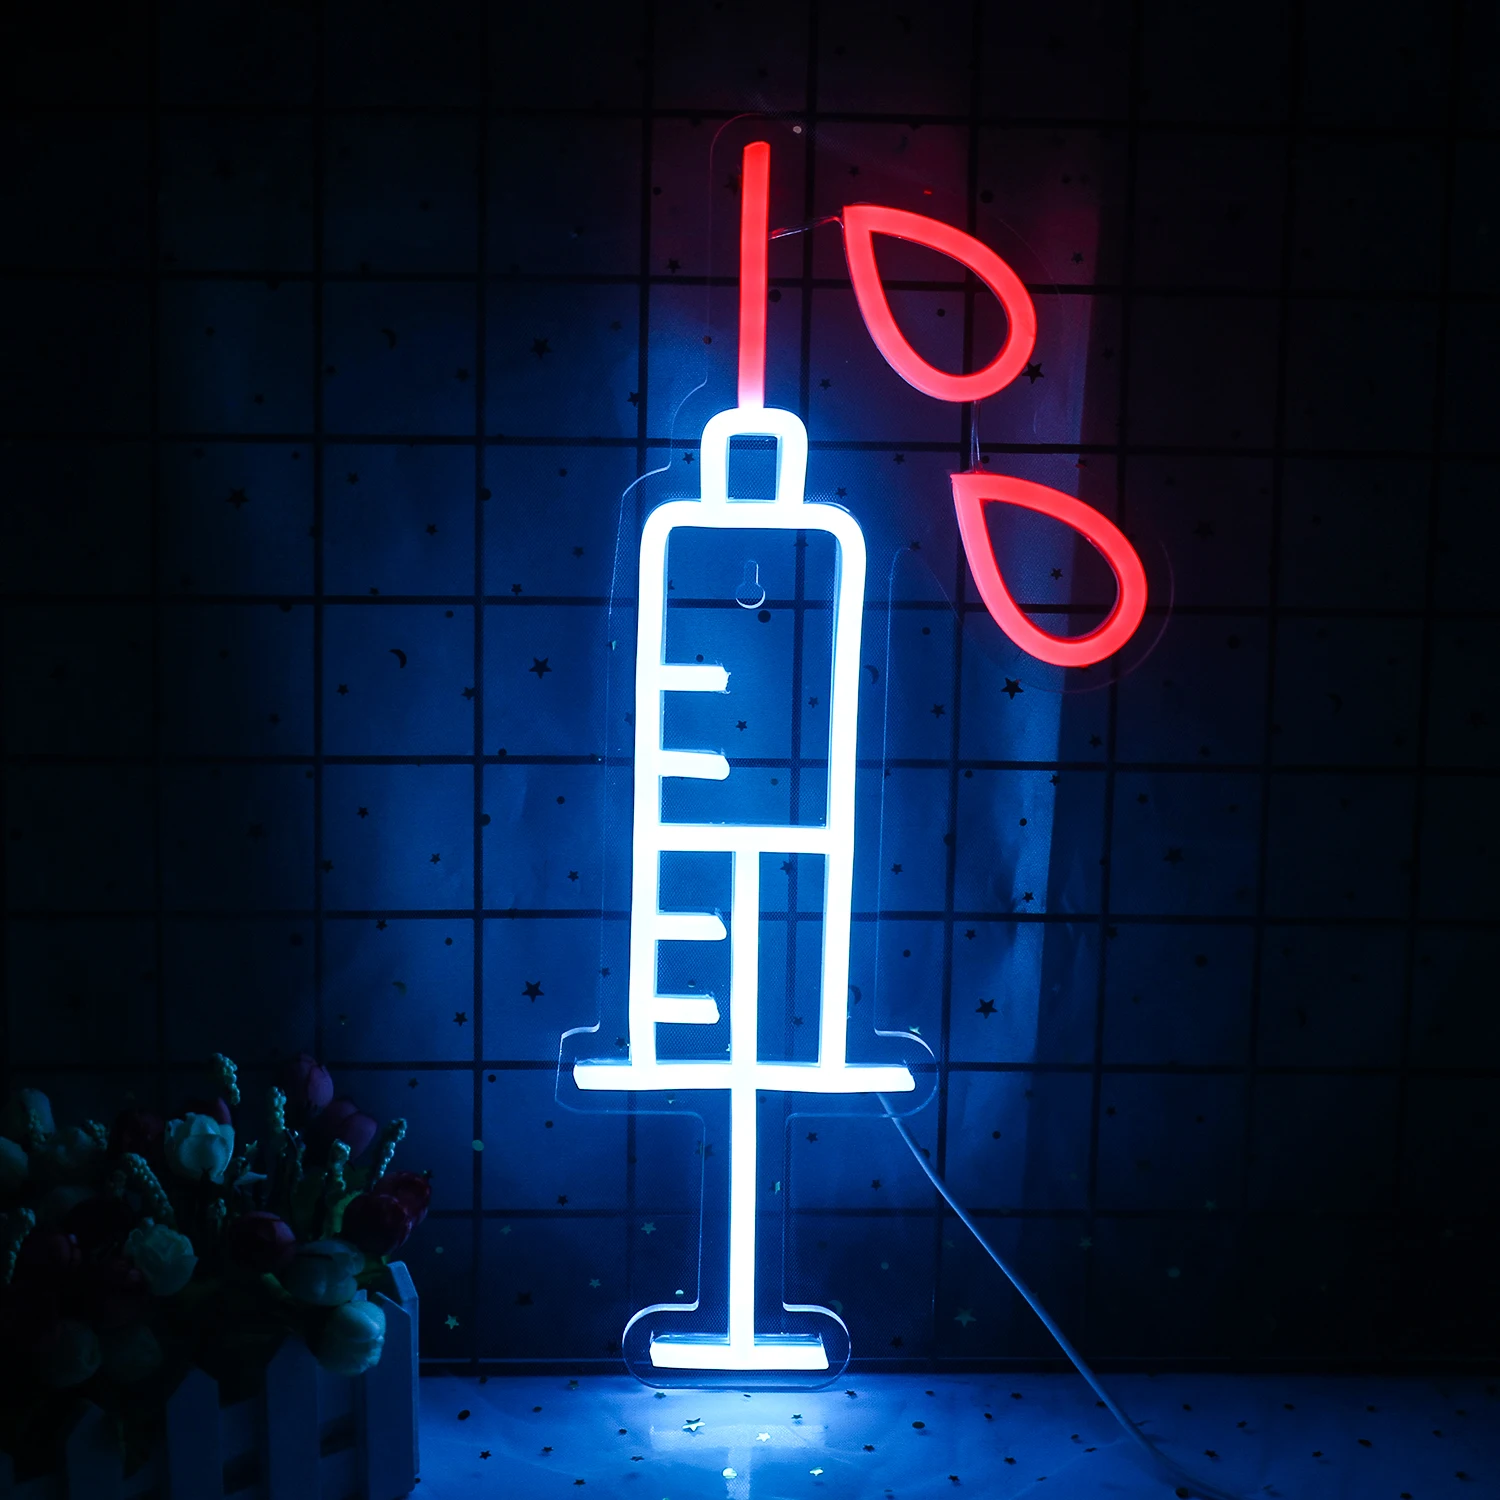 Interesting Syringe Neon Sign Led Light Needle Restaurant Bar Venue Party Room Shop Neon Art Wall Decor Child Personality Gift toy traffic toys for kids sound light mini cones sign models plastic signs signal plaything child